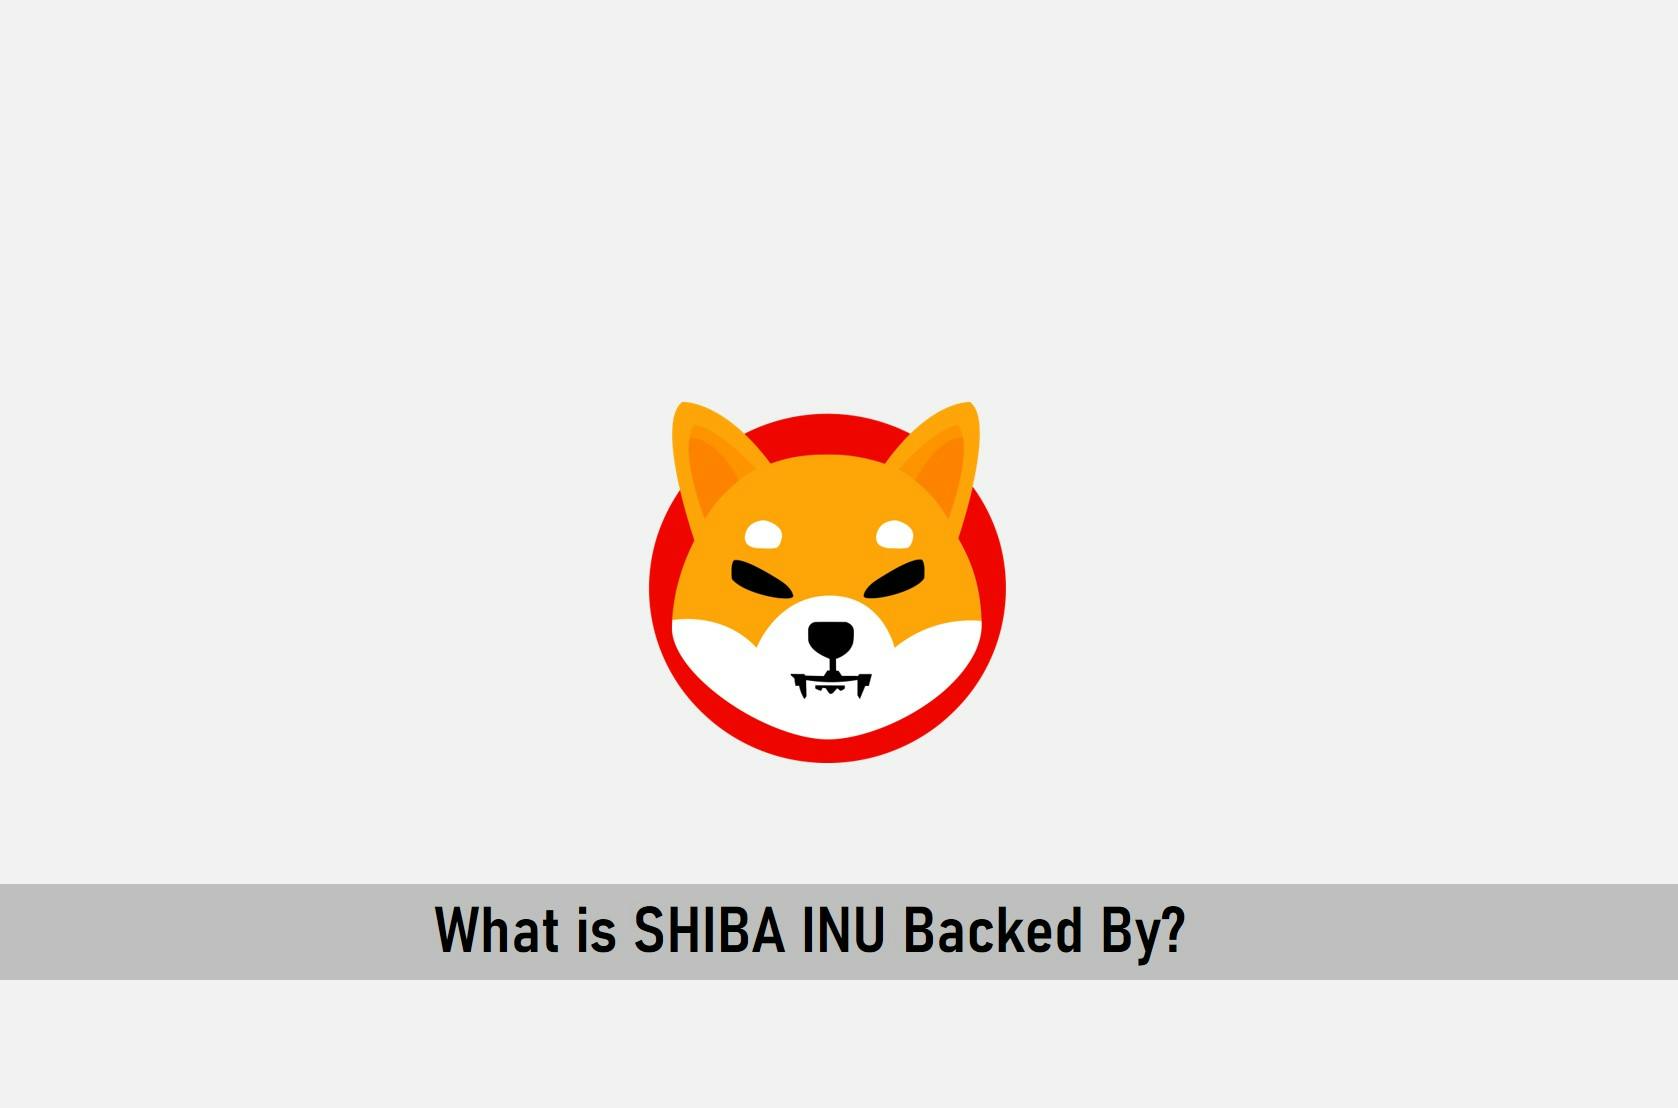 What is Shiba Inu SHIB Backed By?